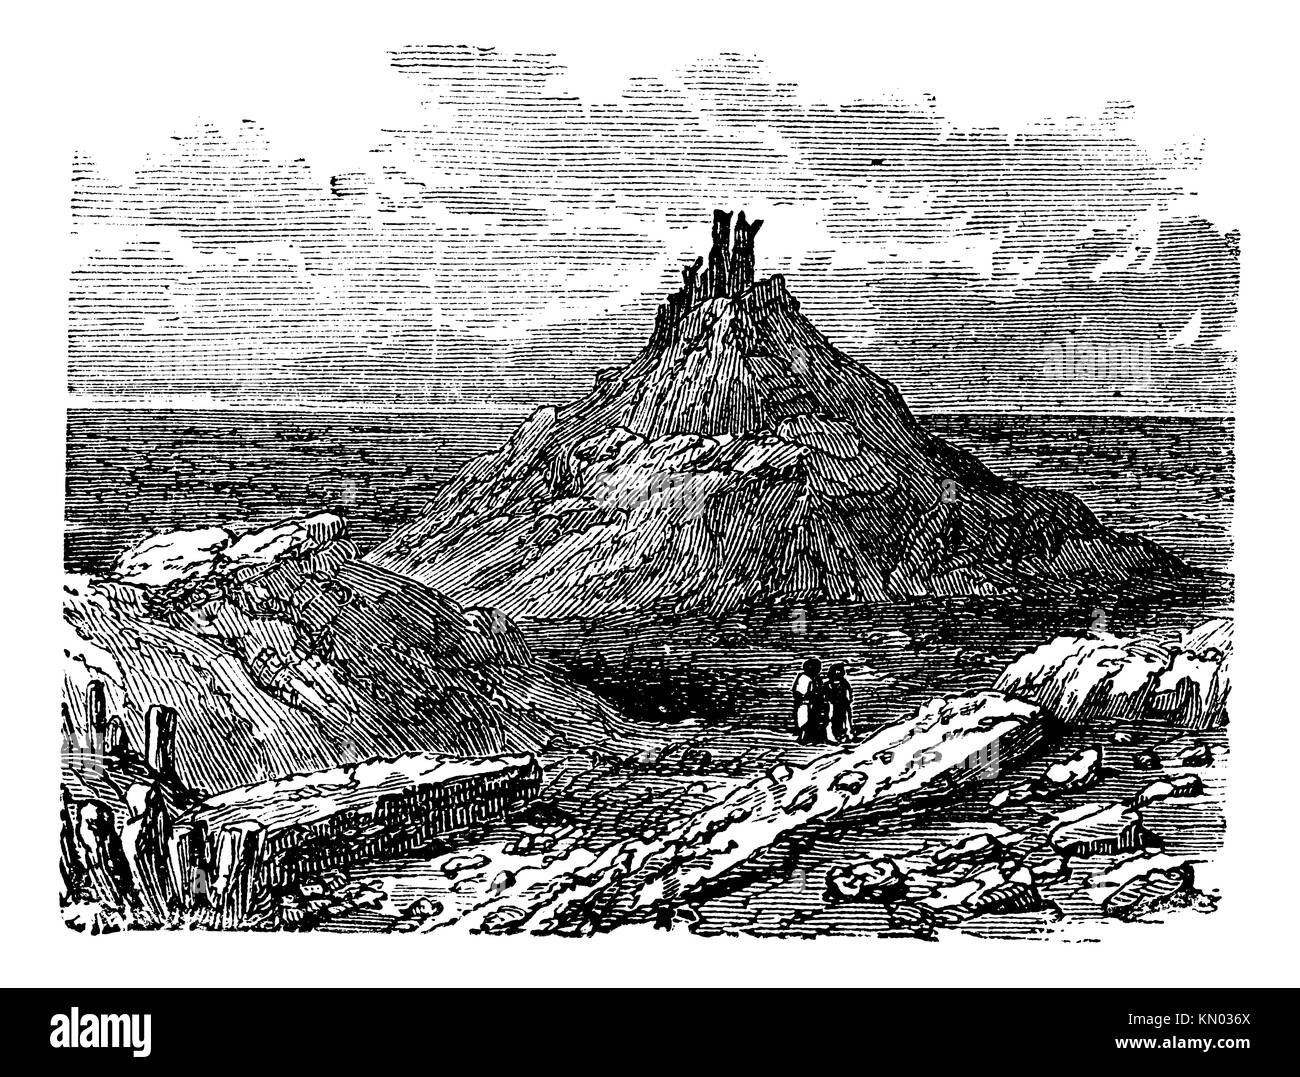 Borsippa or Birs Nimrud, in Babil, Iraq, during the 1890s, vintage engraving  Old engraved illustration of Borsippa Stock Photo